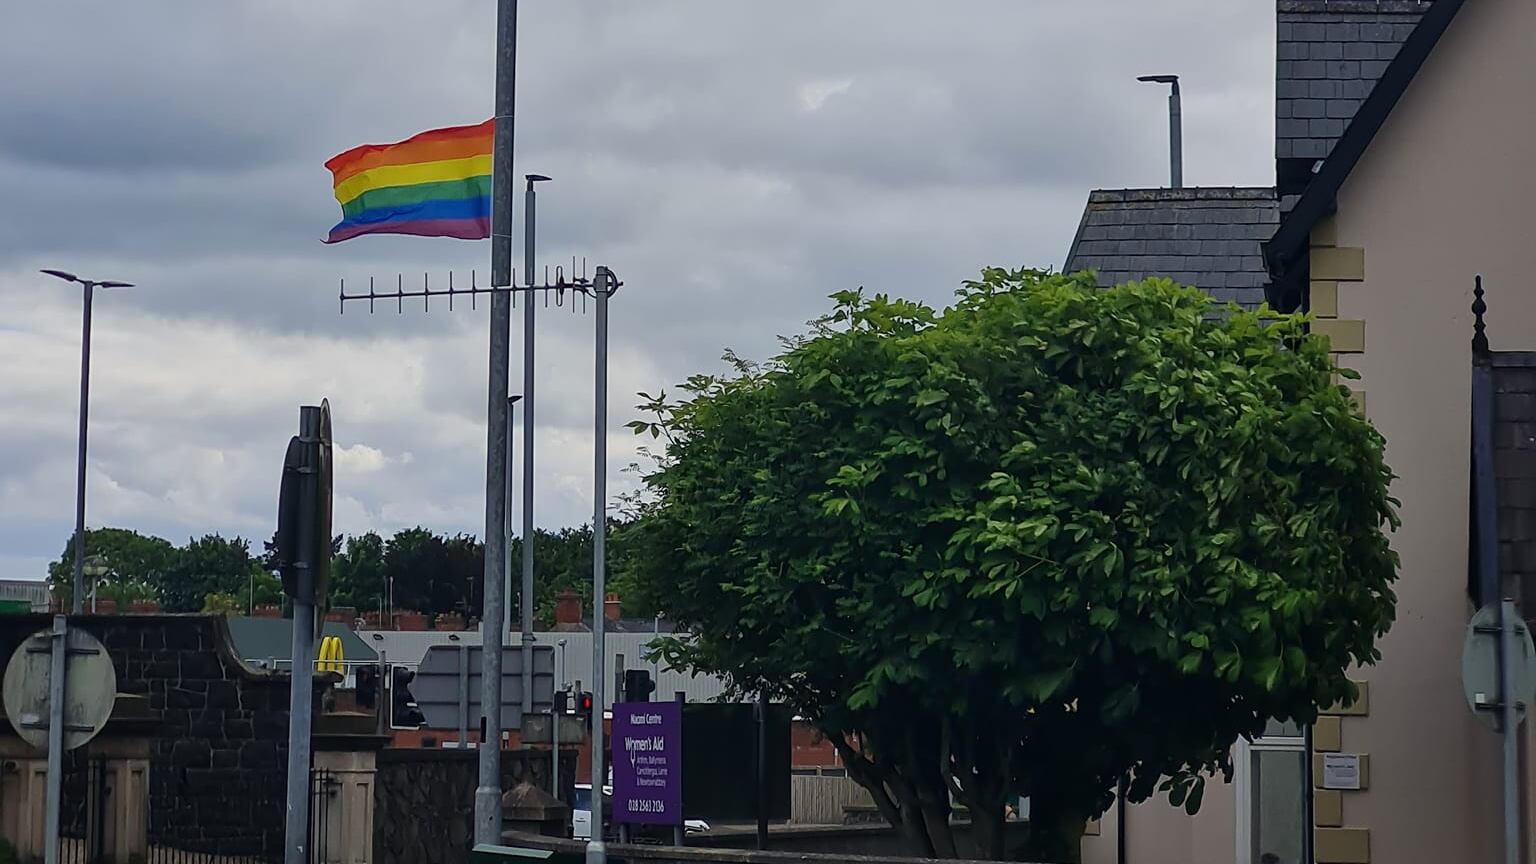 The flags which were put up around the Ballymena area have subsequently been taken down